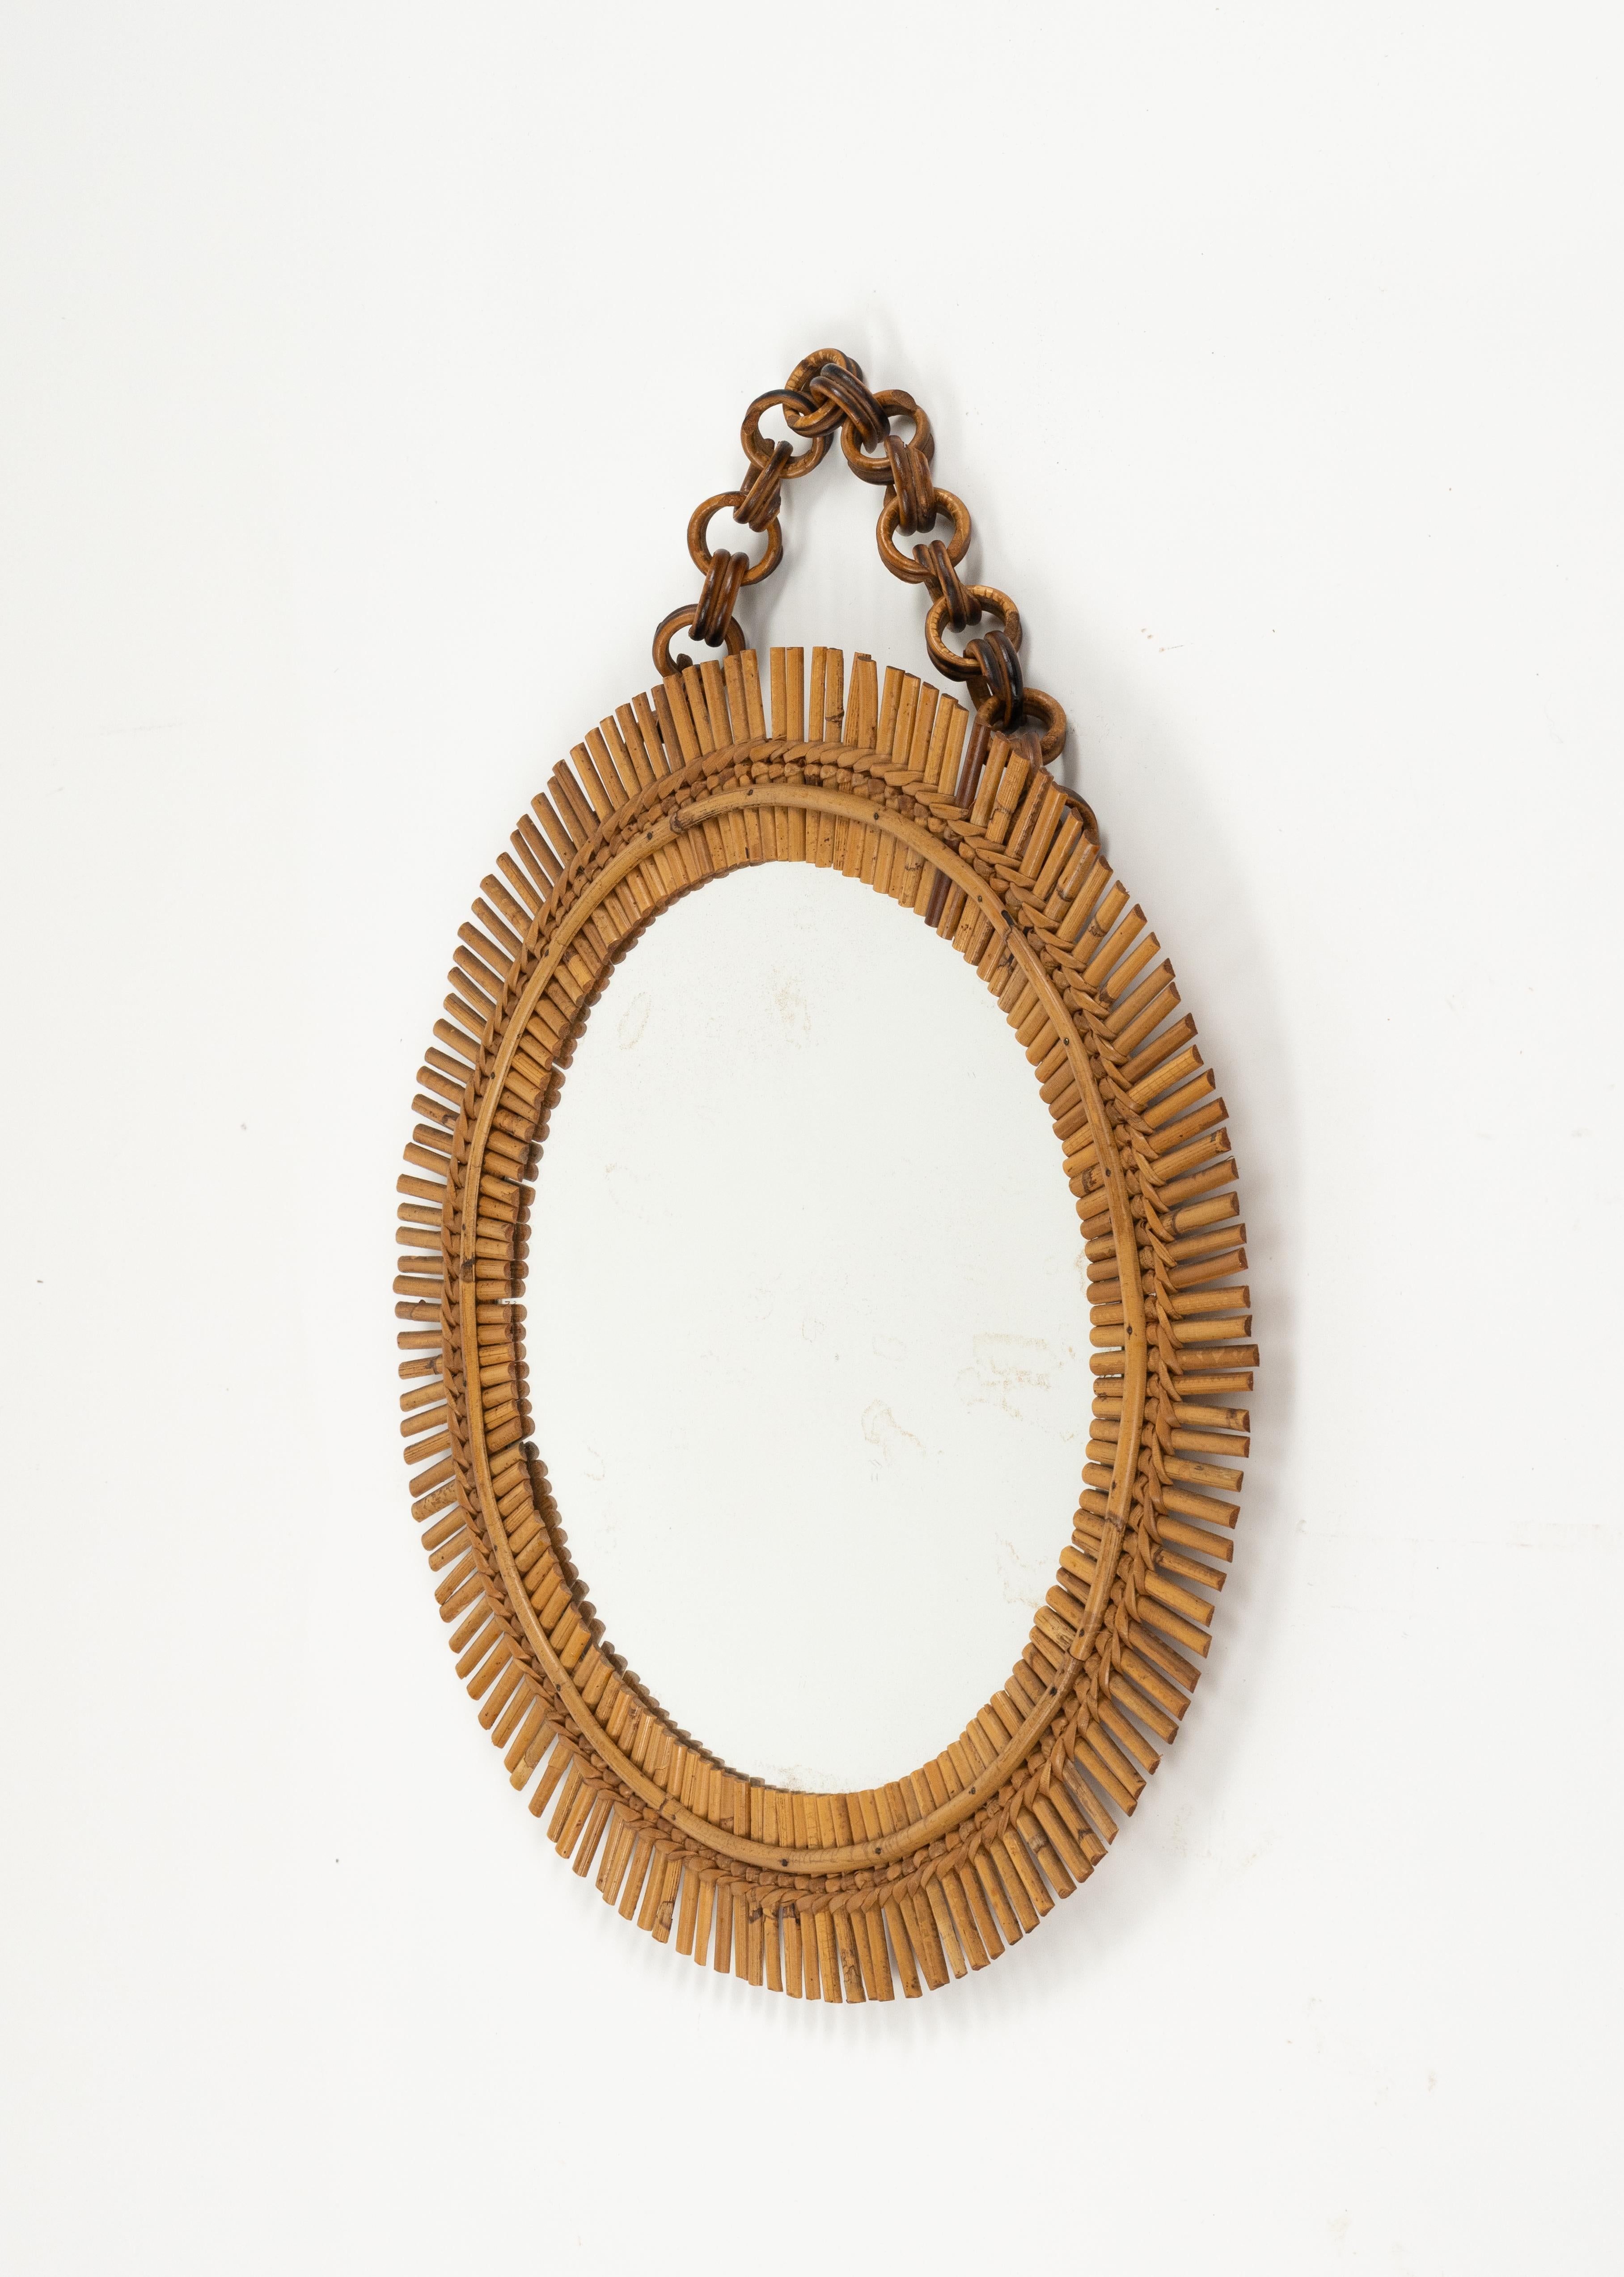 Midcentury Rattan and Bamboo Round Wall Mirror with Chain, Italy 1960s For Sale 1